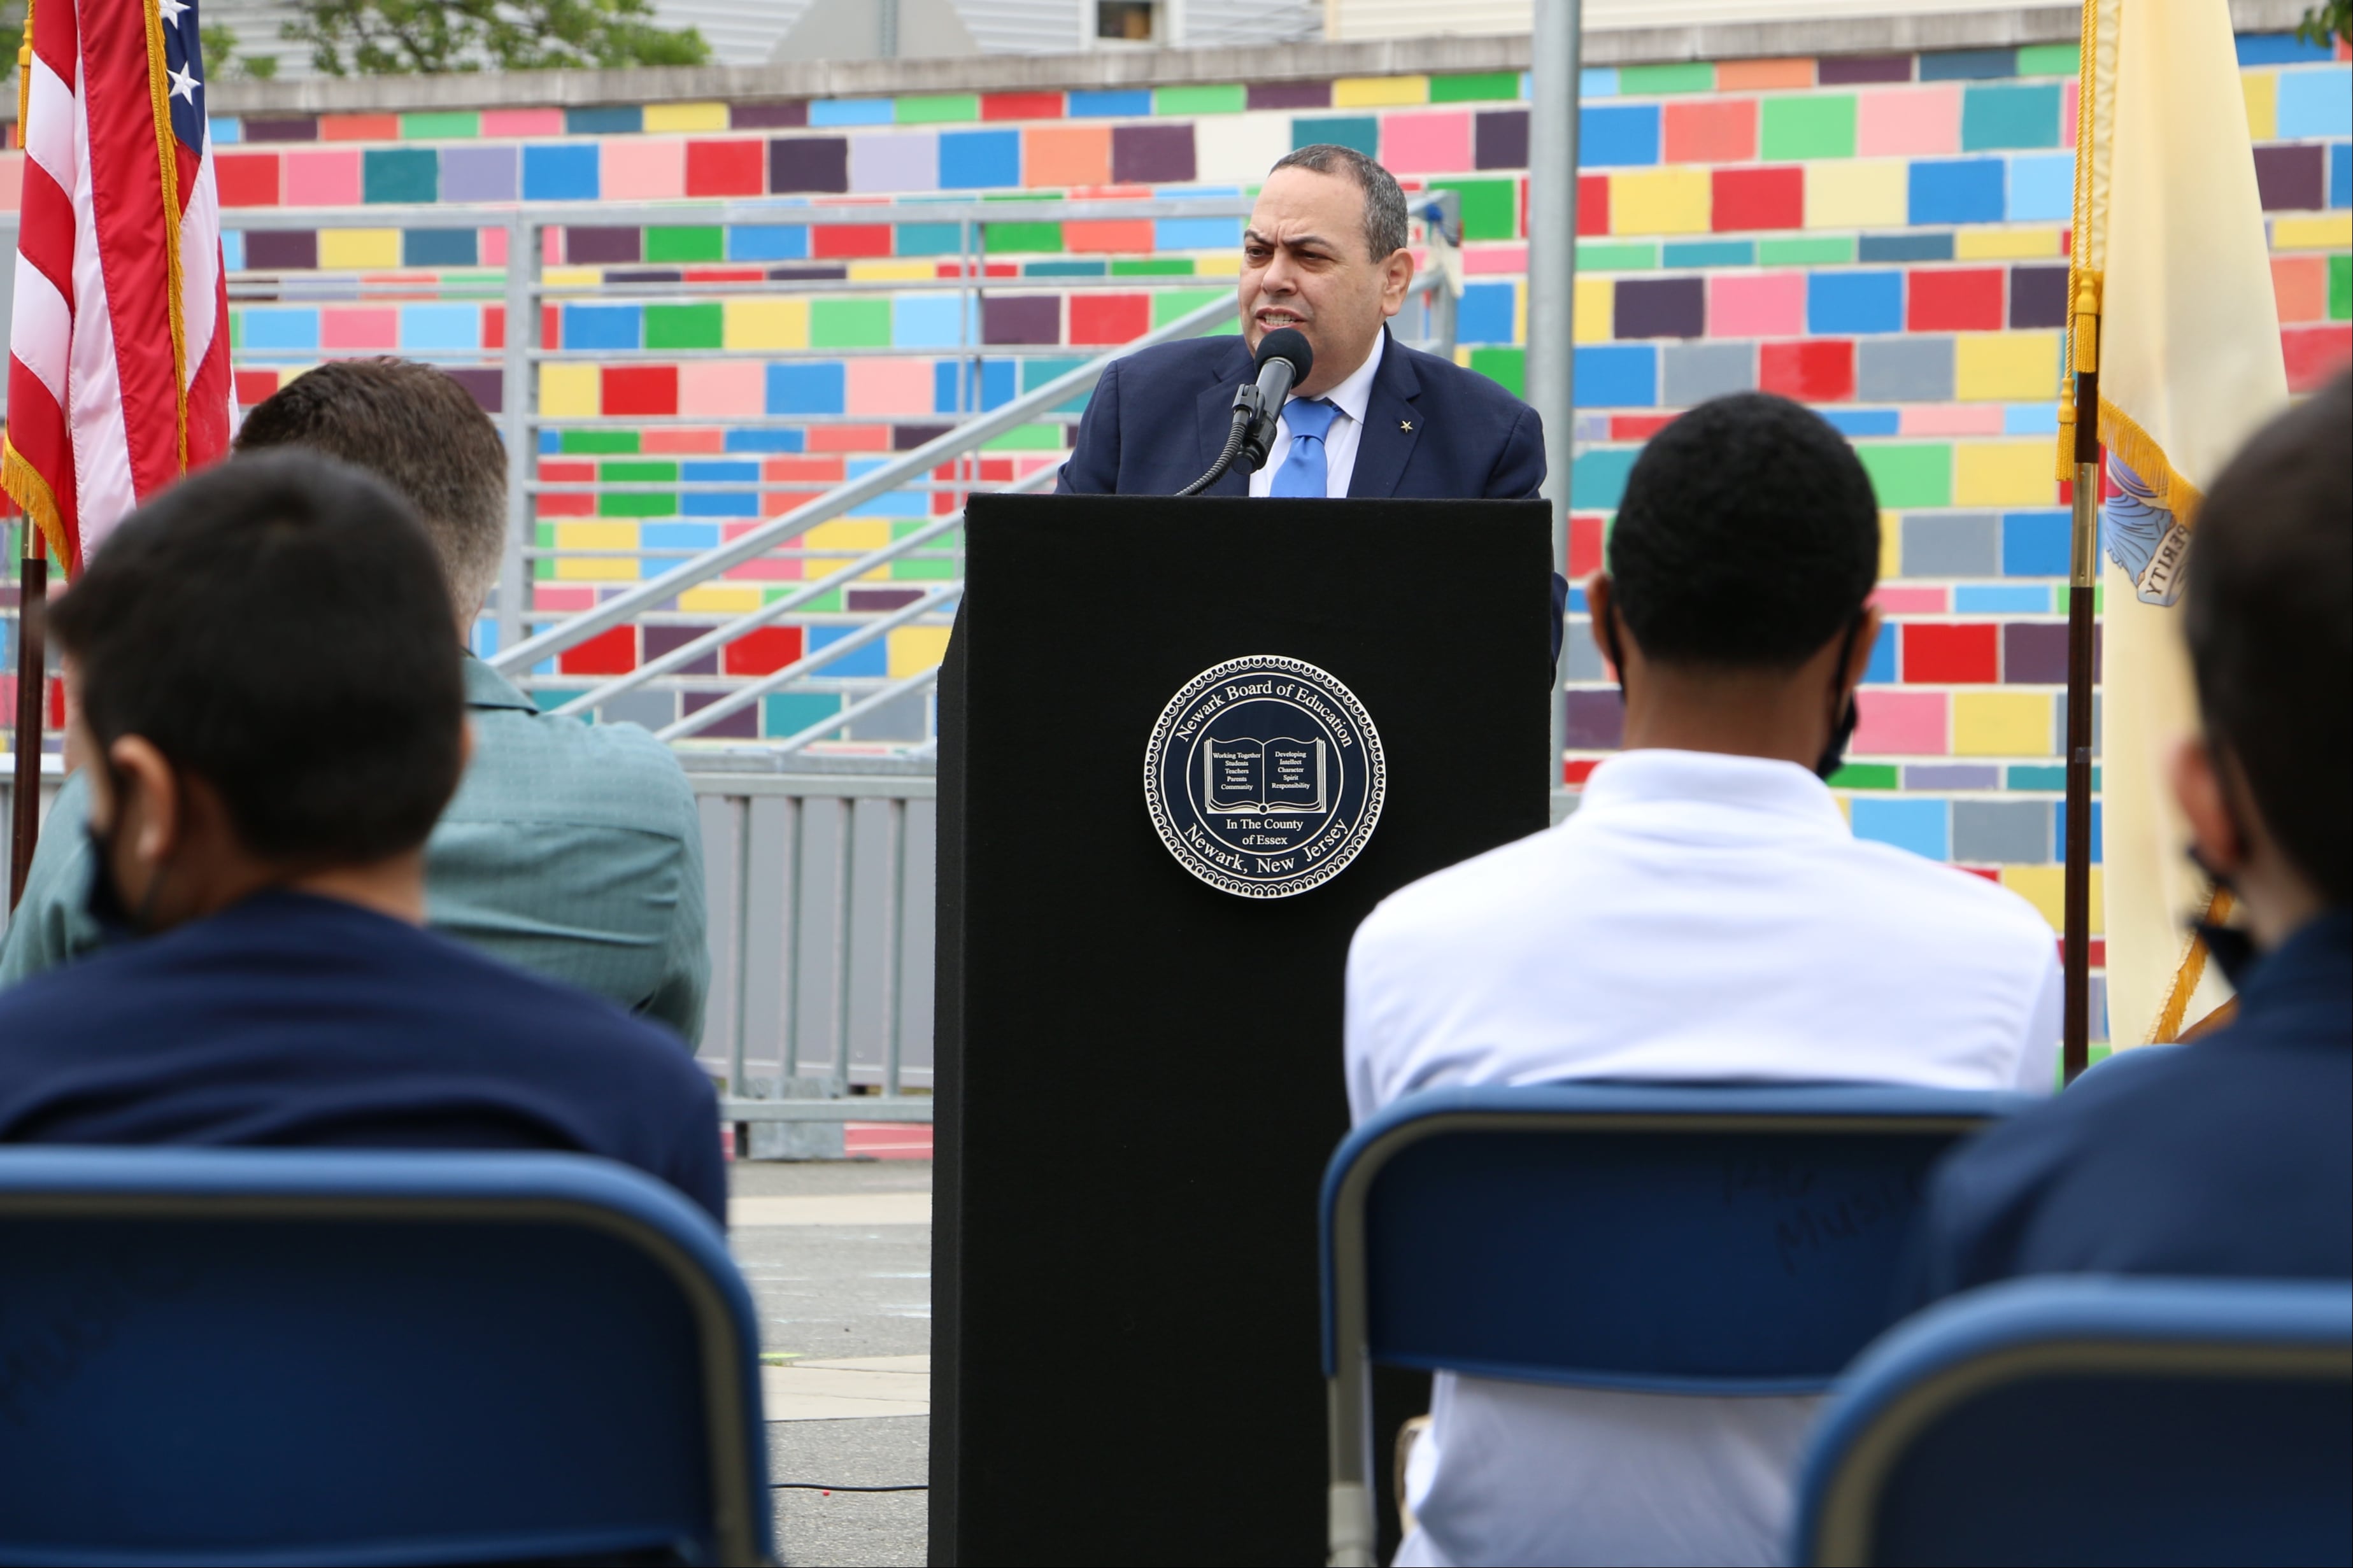 Newark schools Superintendent Roger Leon speaks while standing at a podium against a colorful tile backdrop at First Avenue School, with the backs of several audience members in the foreground and an American flag on the left. 